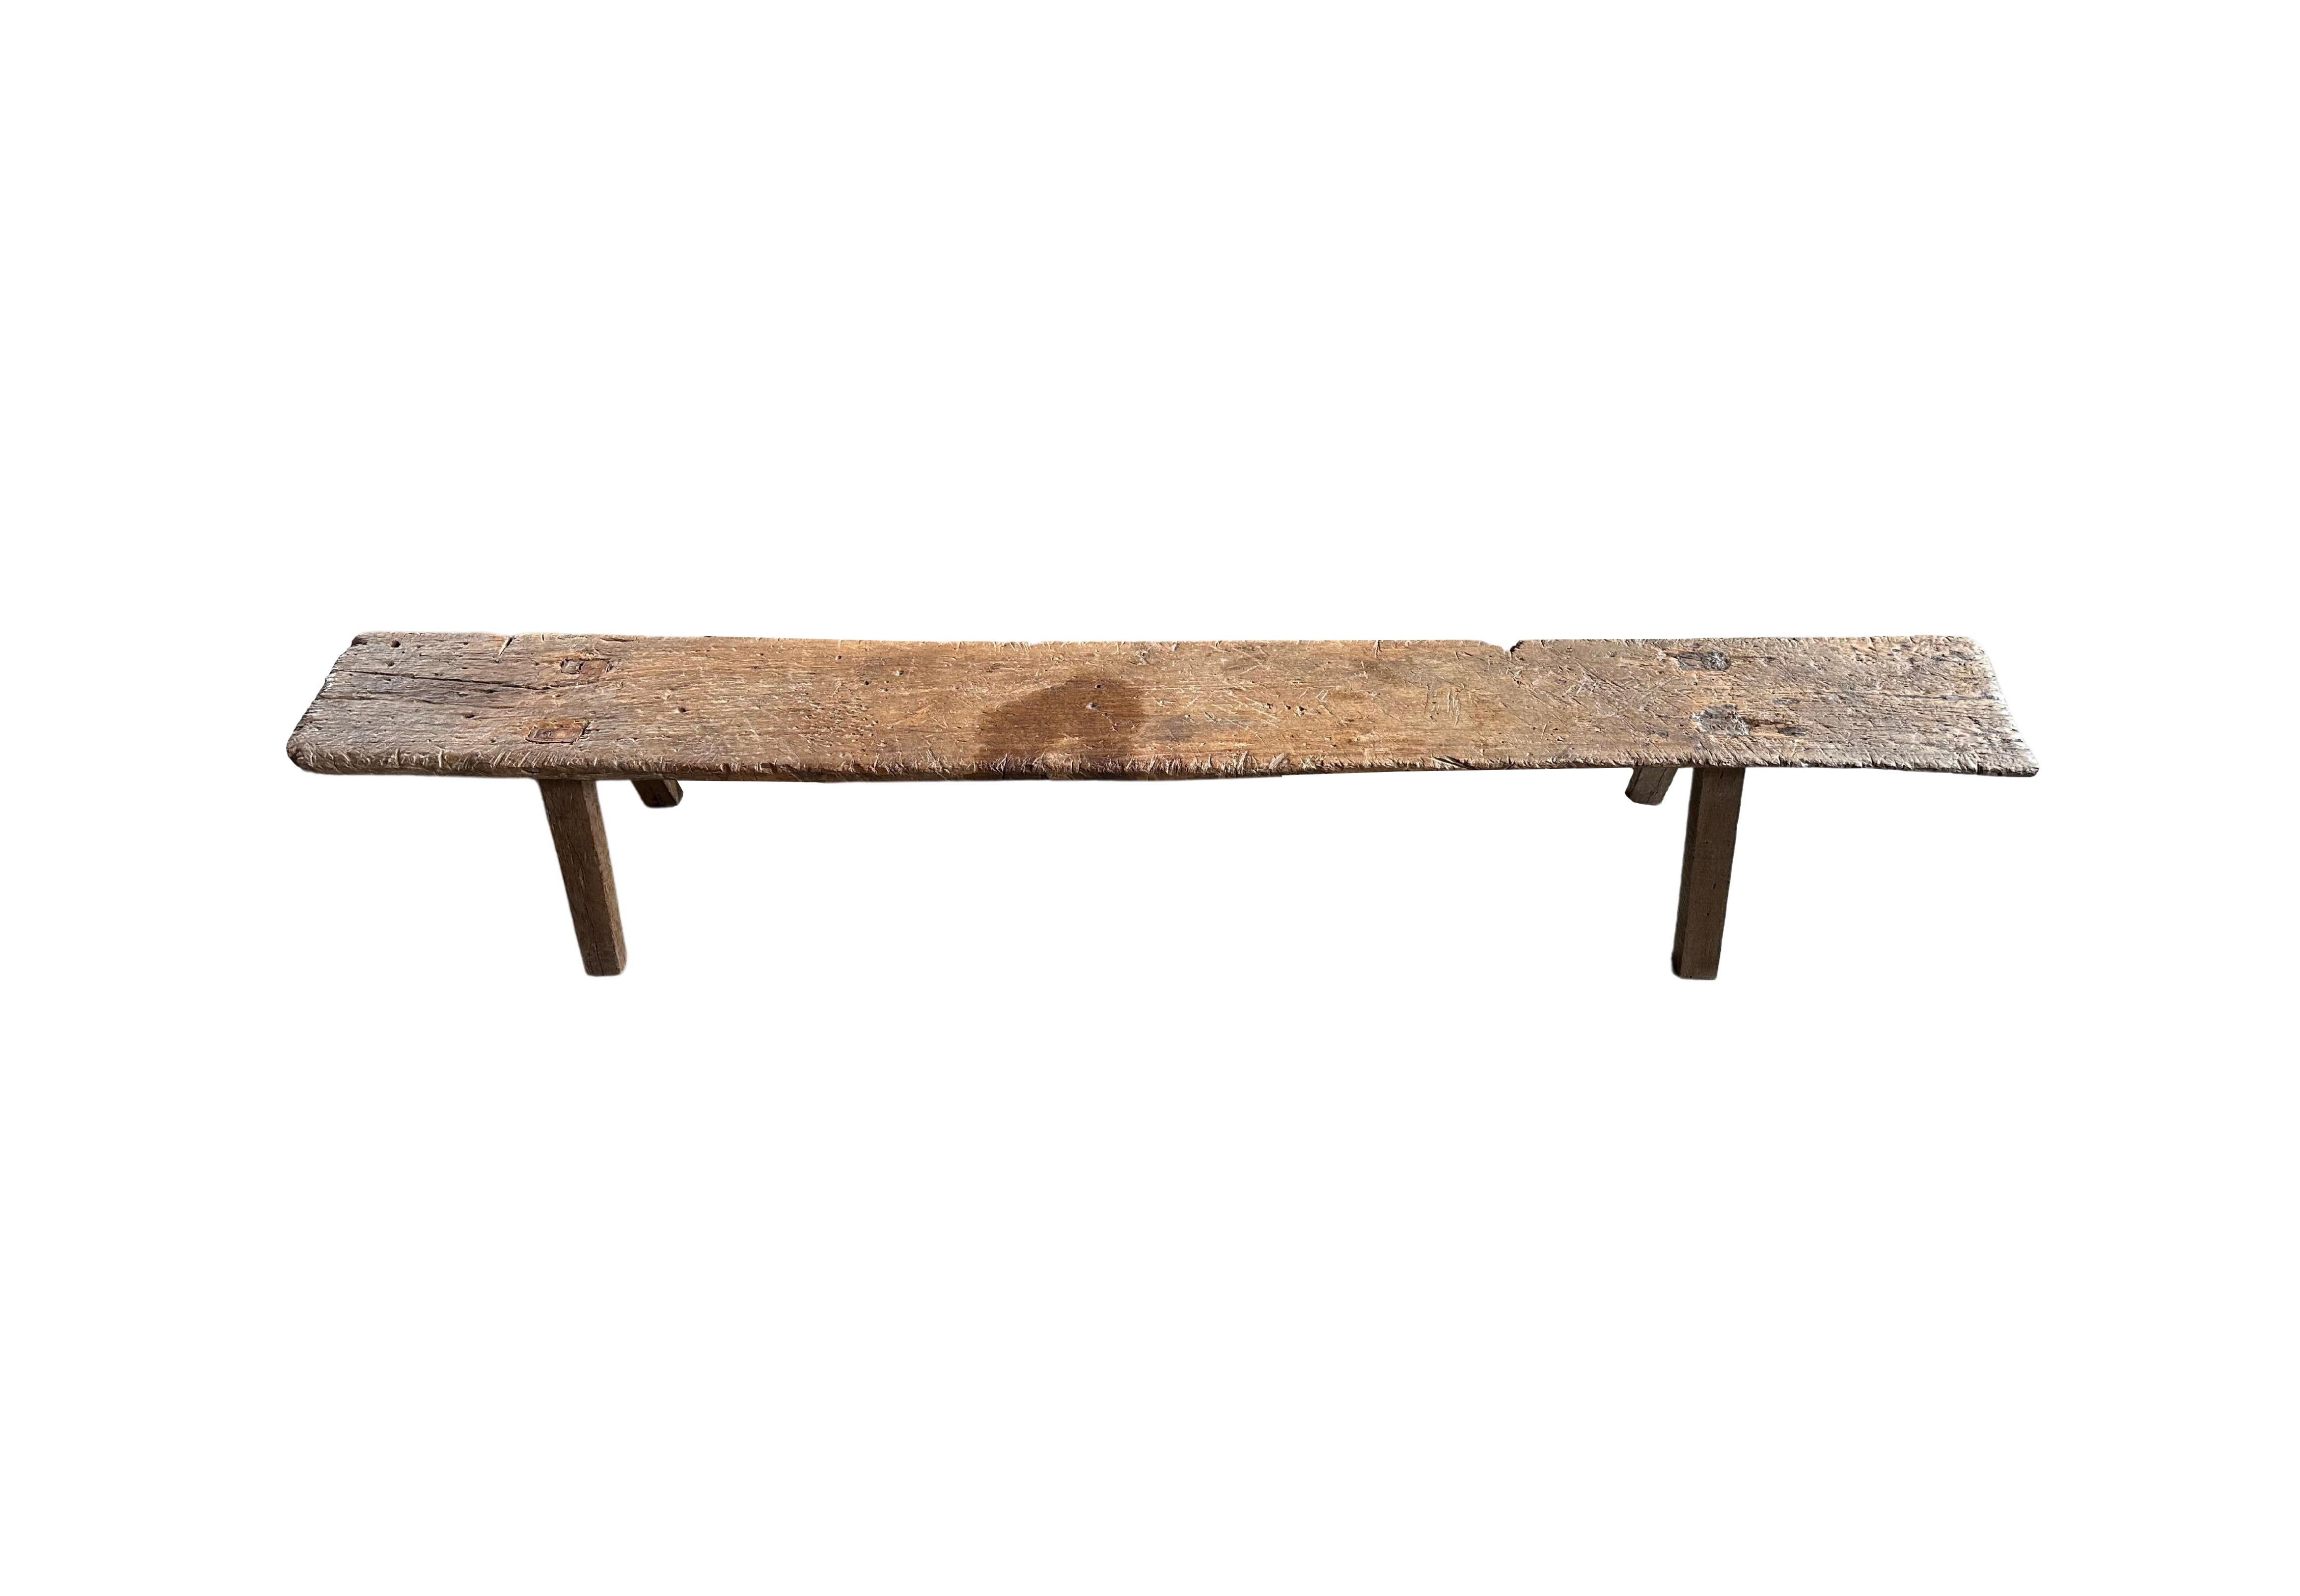 This hand-carved teak wood bench originates from the Island of Madura, off the coast of Northeastern Java. It features a long slender form with angular legs. A wonderful sculptural object with wood textures and shades. The seat was carved from a